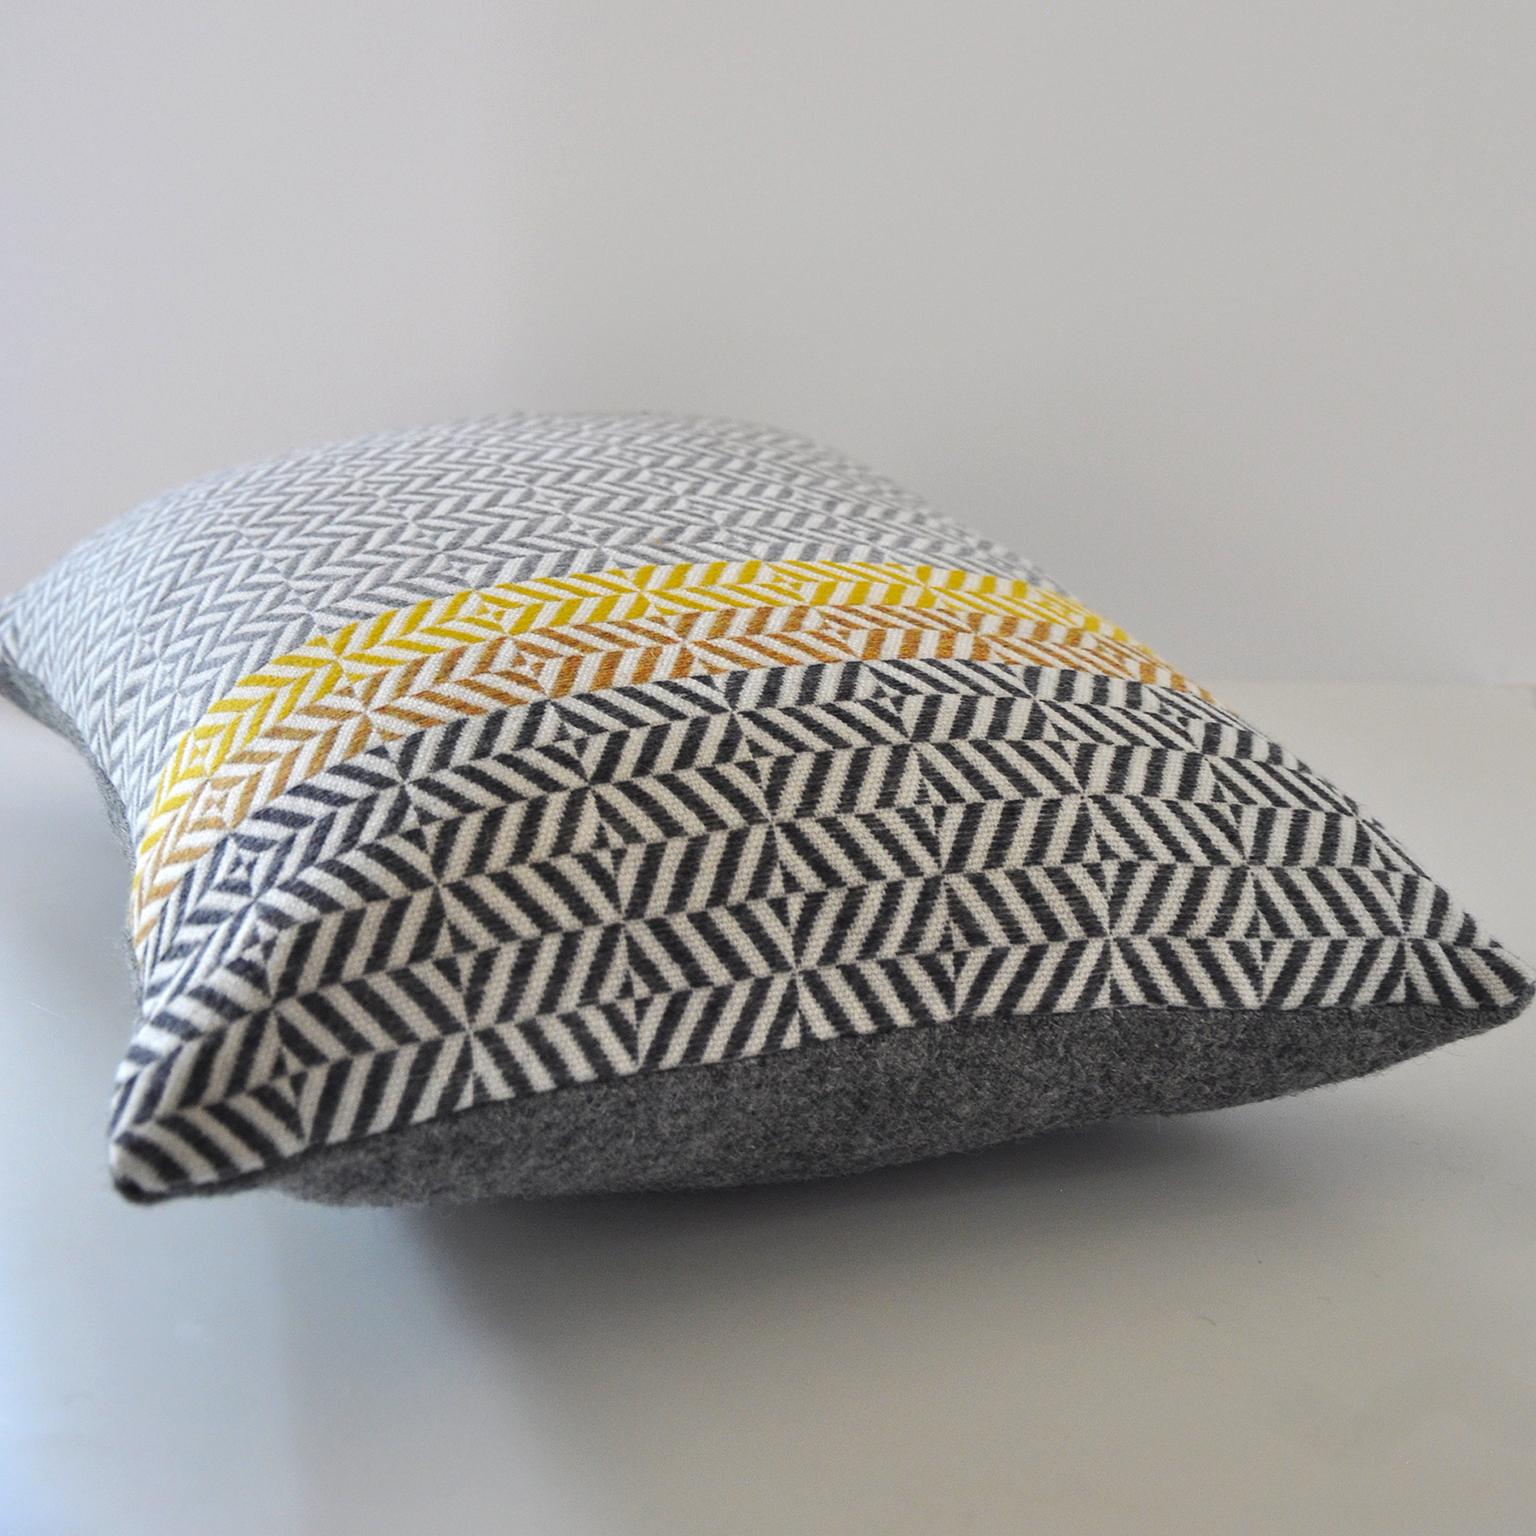 British  Handwoven 'Uccle' Geometric Large Merino Wool Cushion Pillow, Piccalilli/Greys For Sale